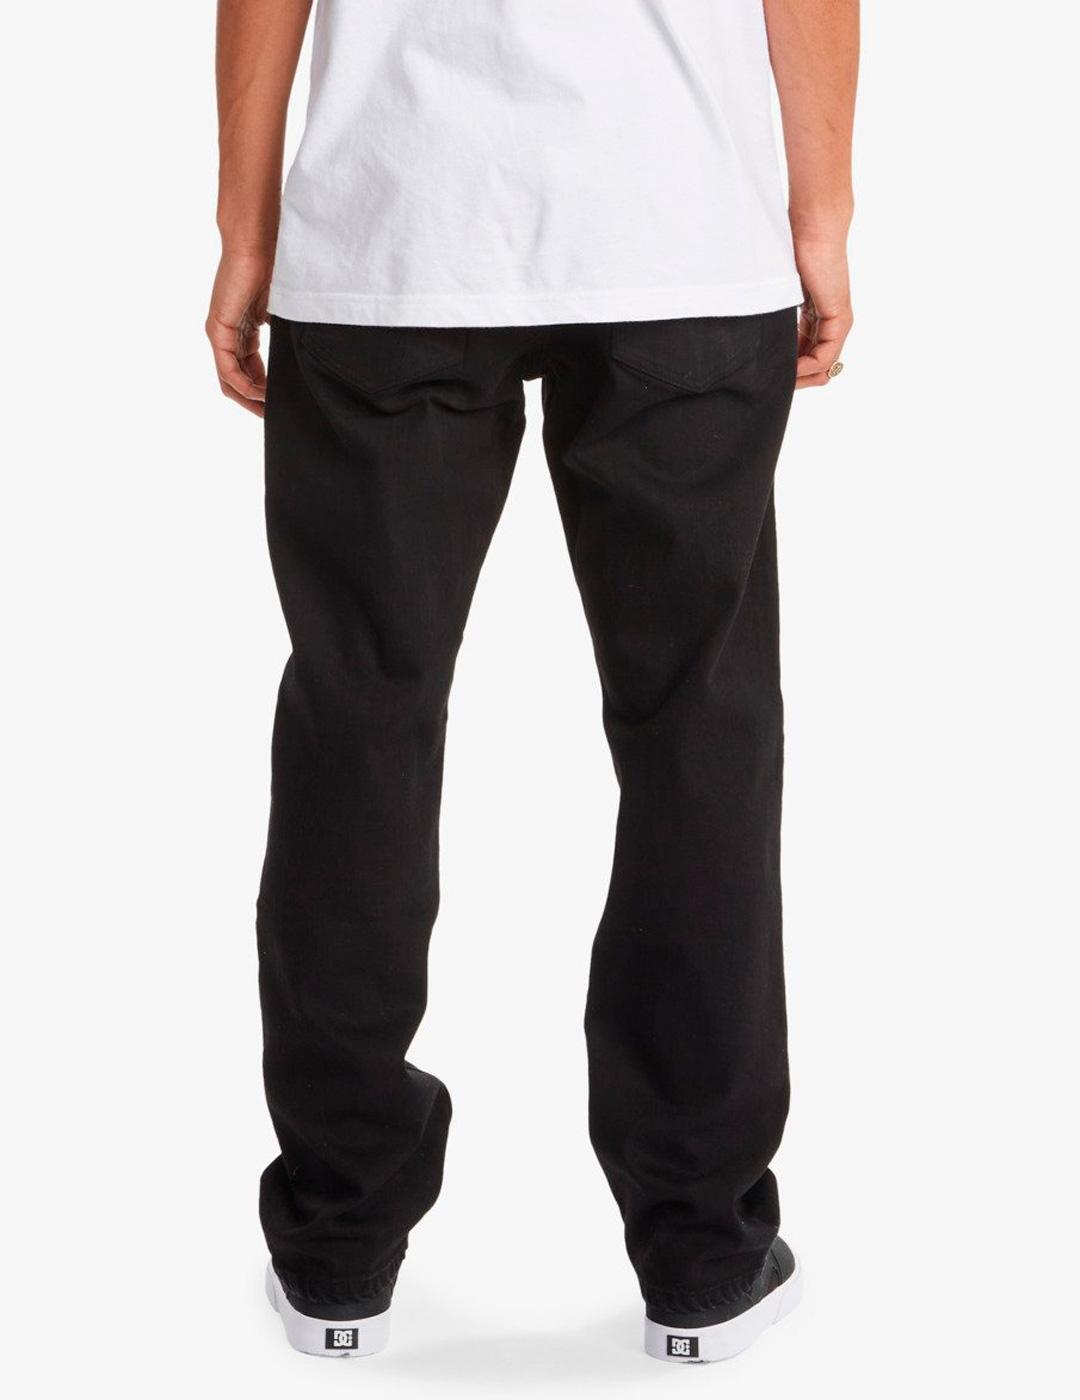 Pantalón WORKER RELAXED SBW - Black Wash